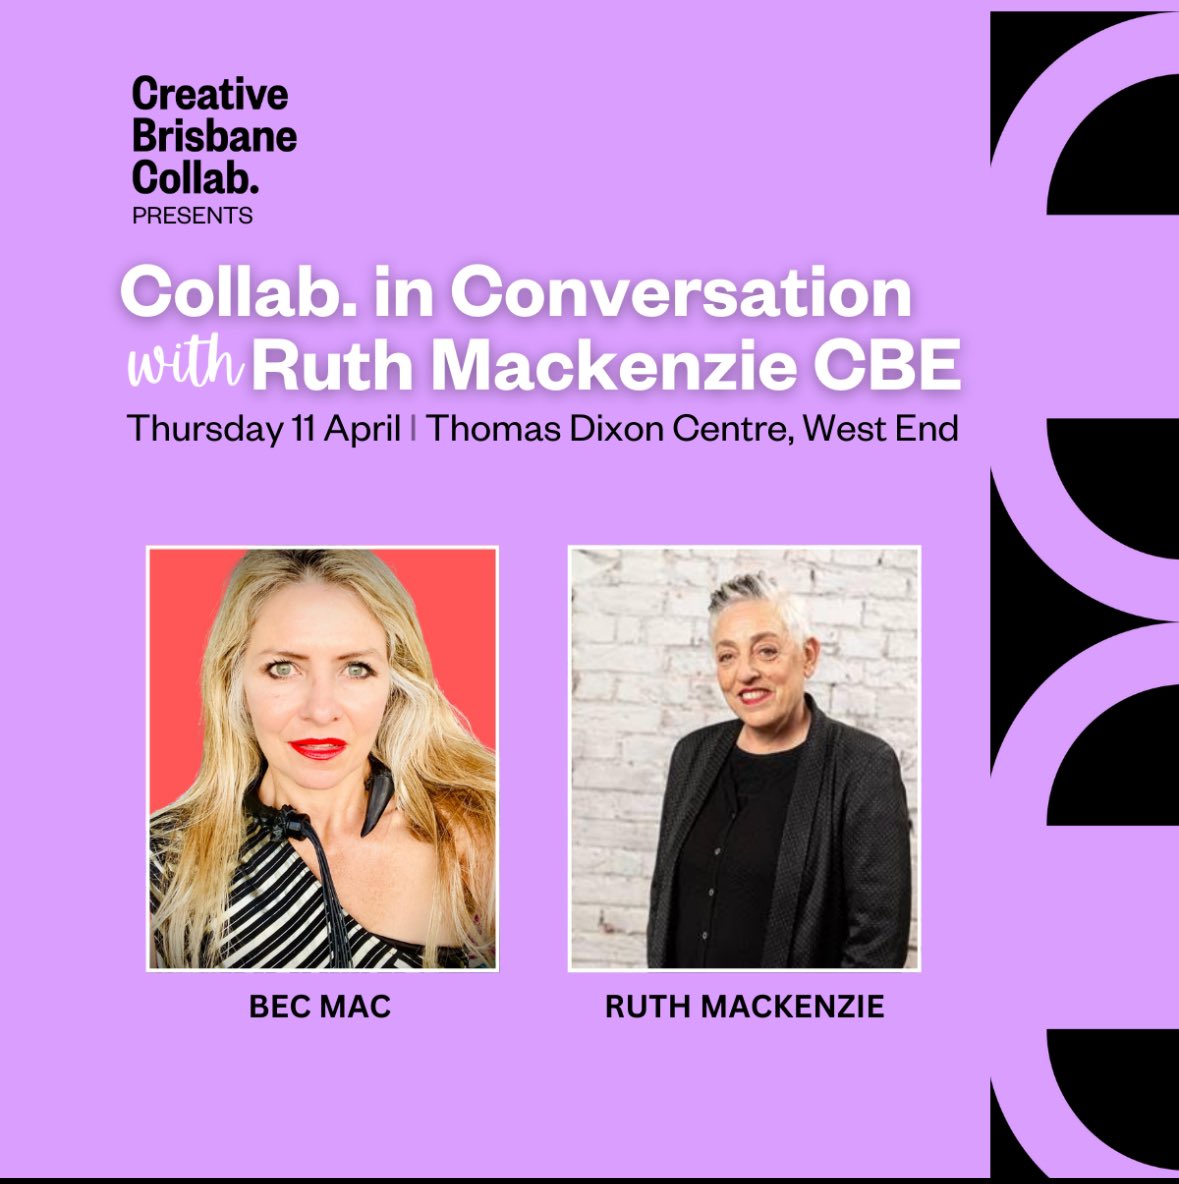 What could an Olympic legacy look like for the creative sector?Join me for the inaugural Collab. in Conversation event with Ruth Mackenzie CBE, @adelaidefestival AD and Director of London 2012 Festival, the official cultural program of the London 2012 Olympics. @artsqueensland